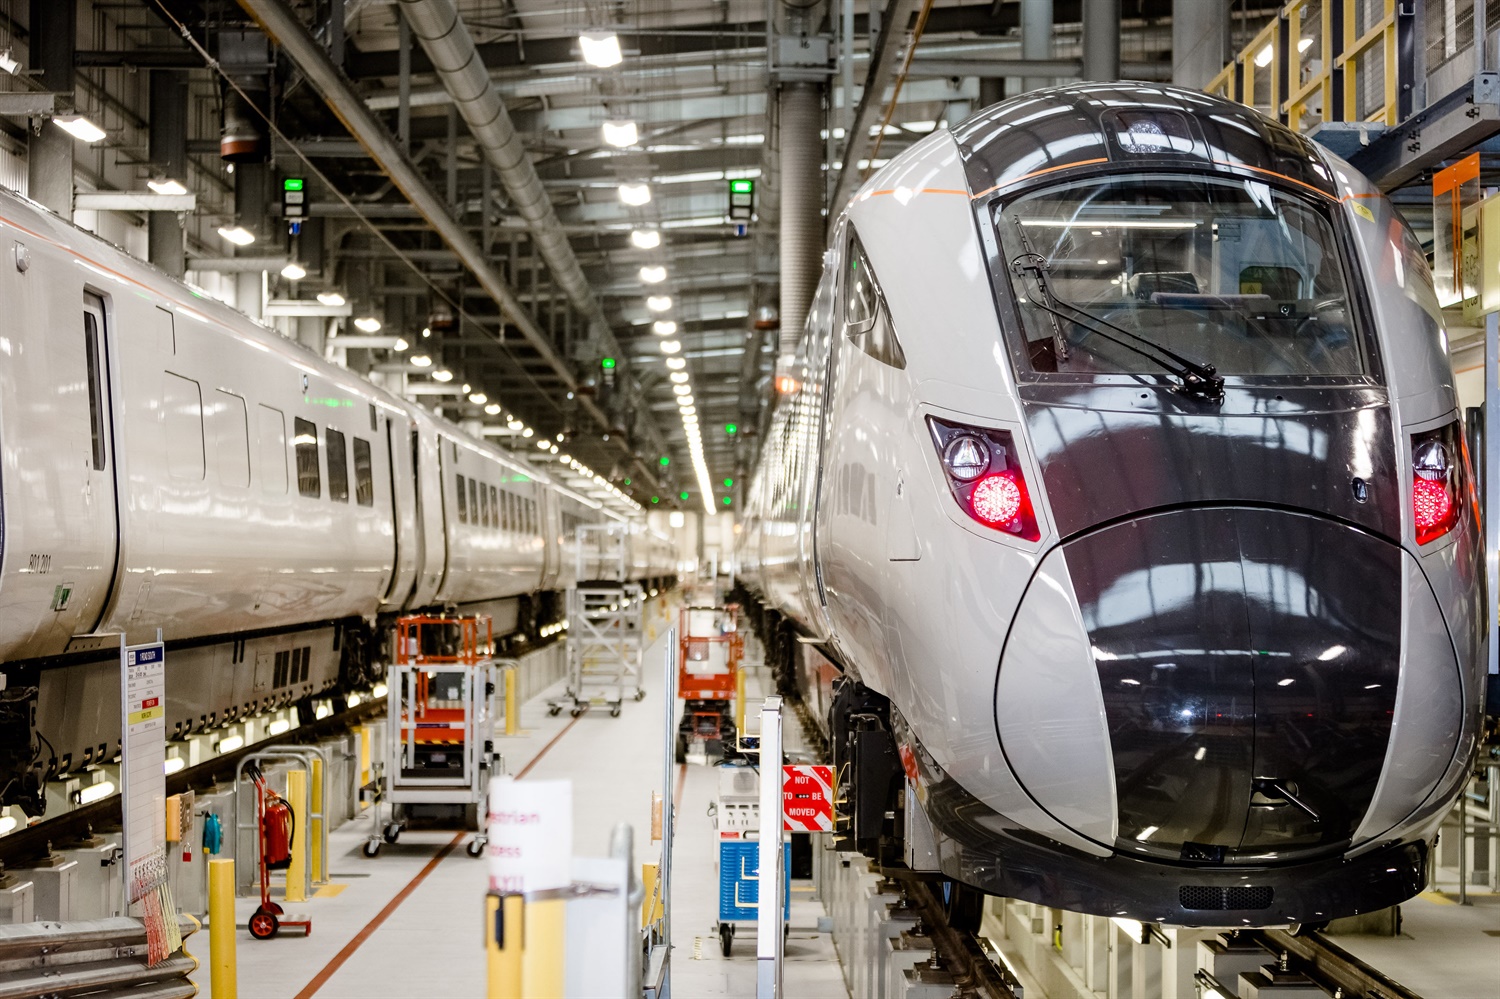 New Hitachi rolling stock unveiled by Hull Trains as part of £60m investment